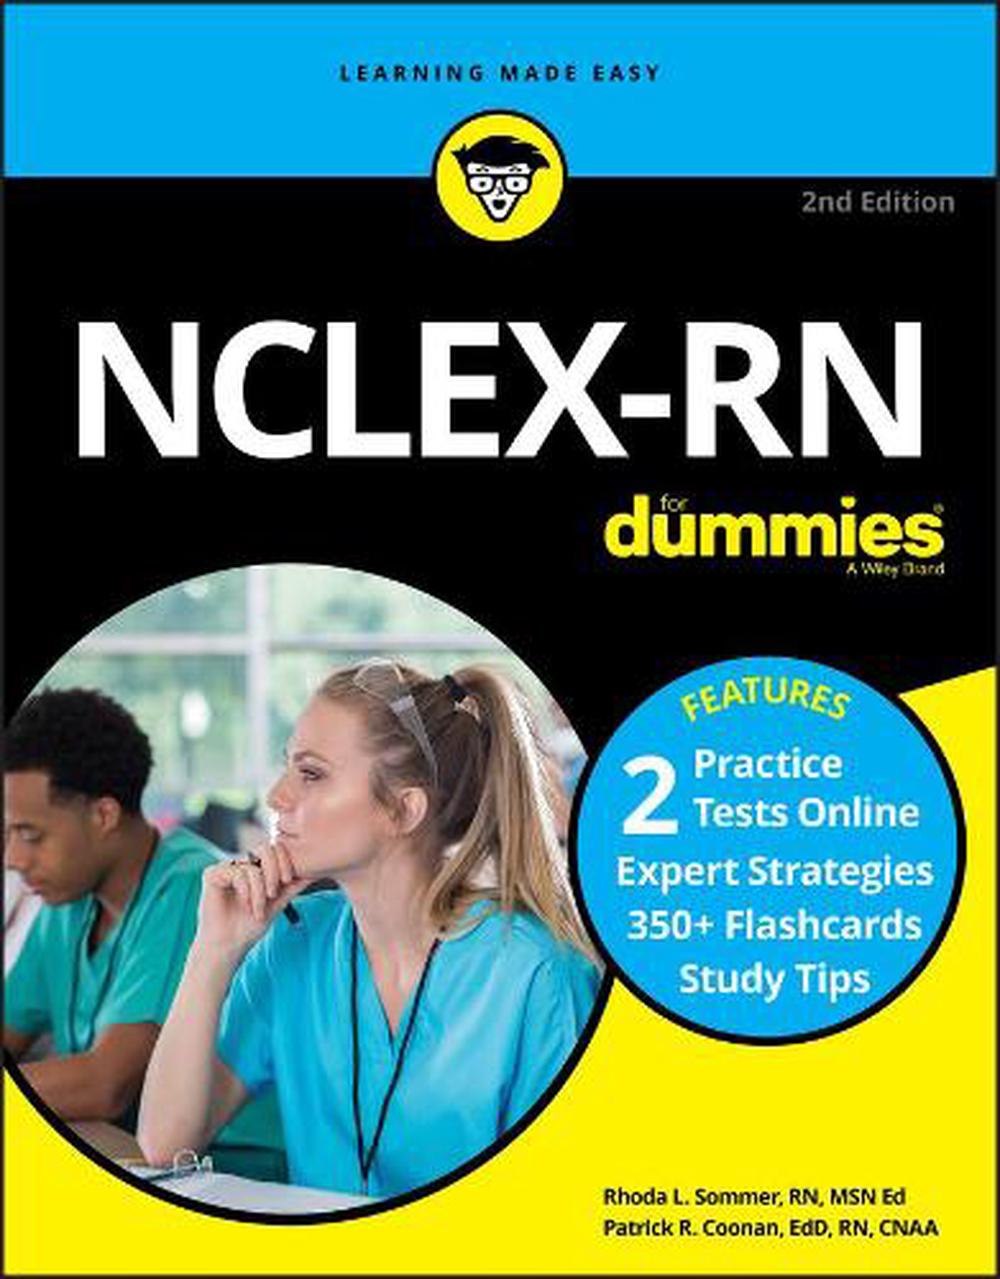 Coonan,　Paperback,　NCLEX-RN　Dummies　For　at　by　Online　Buy　Practice　with　Tests　The　R.　Patrick　online　9781119692829　Nile